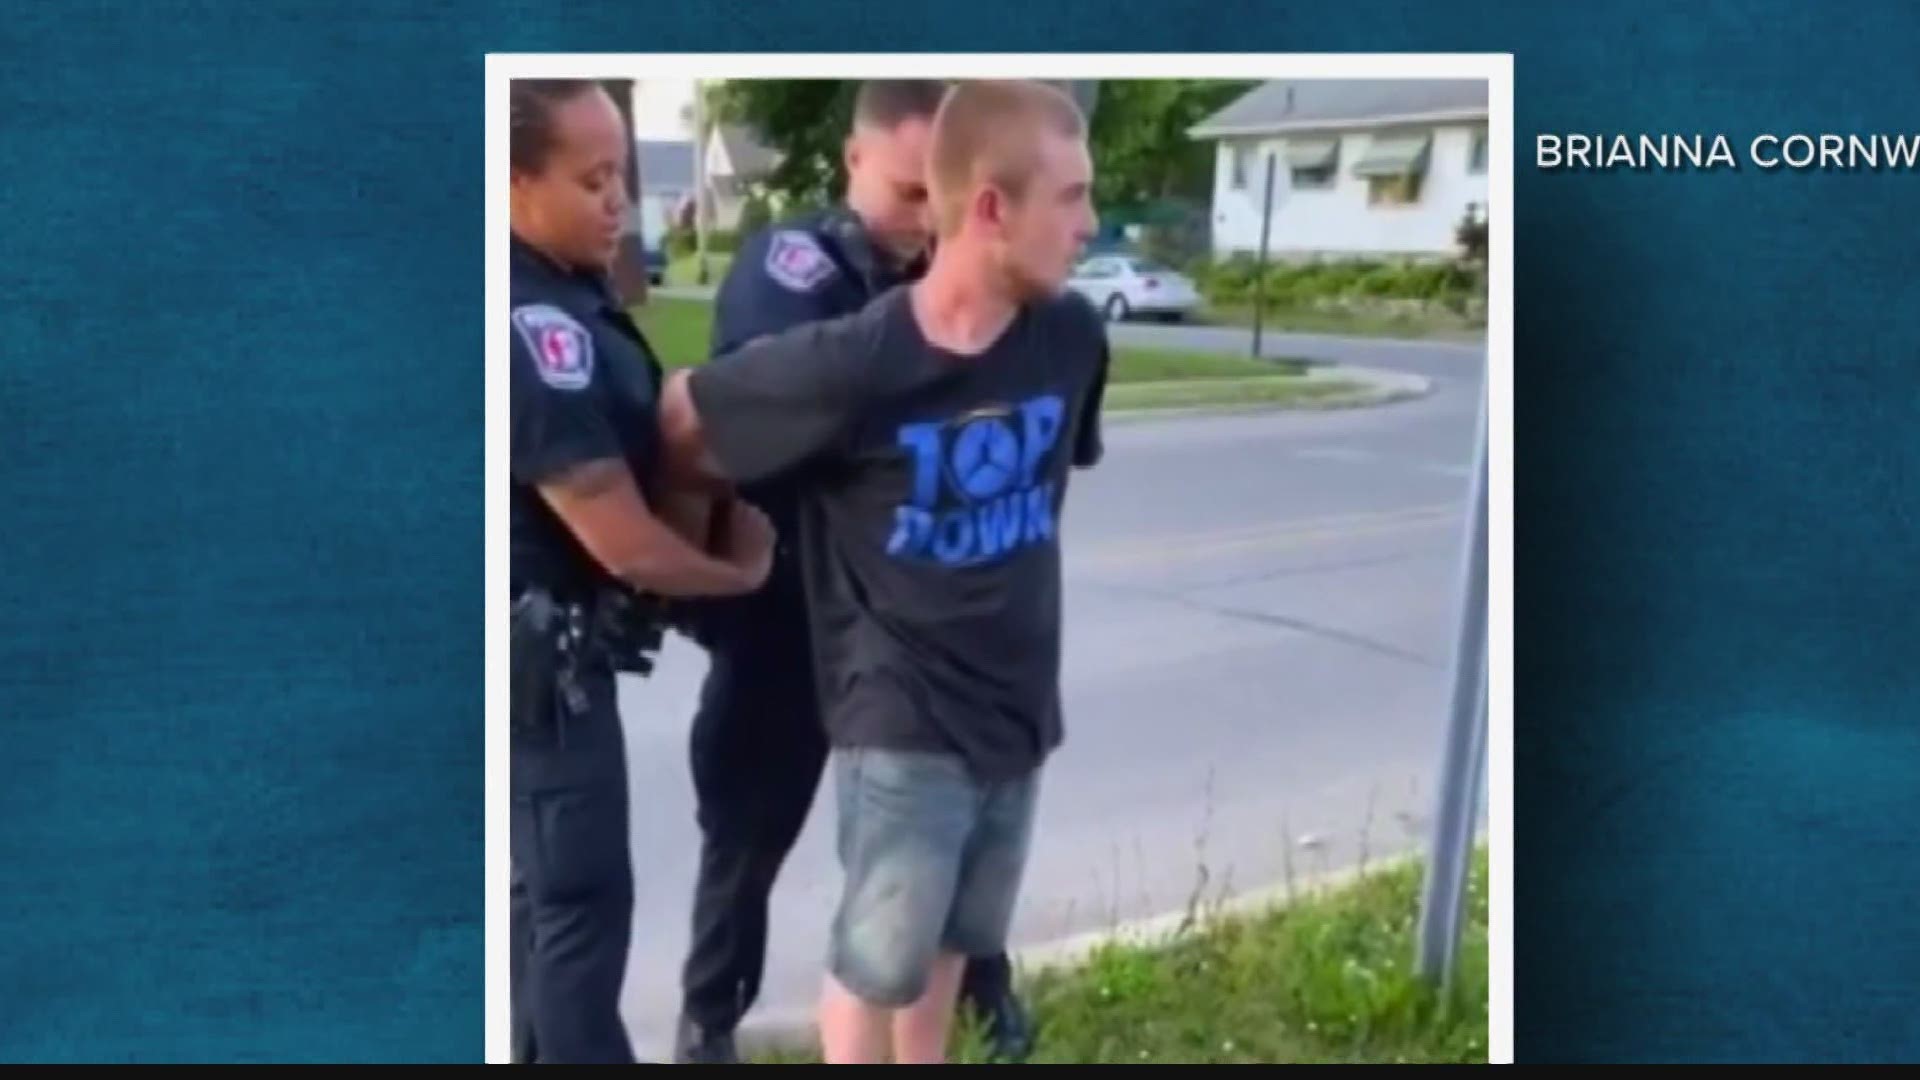 A video shared with 13News shows an Anderson police officer using a chokehold, already banned by the police department because of what happened to George Floyd.